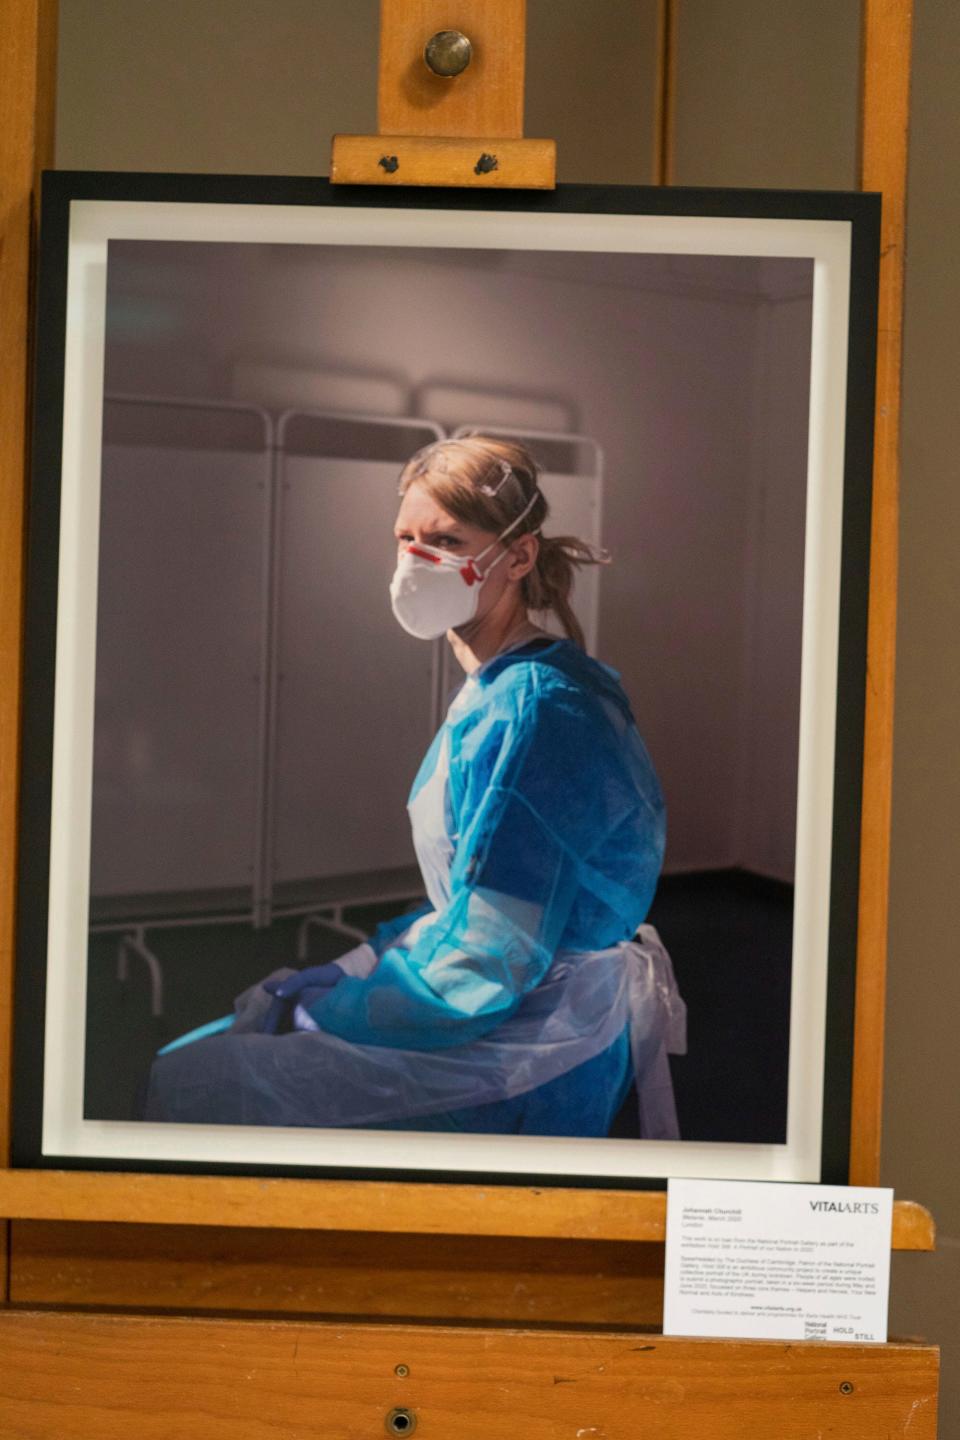 A photograph of nurse Melanie Senior, taken by Johanna Churchill, on display at the Royal London Hospital in London, May 7, 2021, during a visit by Duchess Kate of Cambridge to mark publication of the book "Hold Still," where the photo appears on the cover.